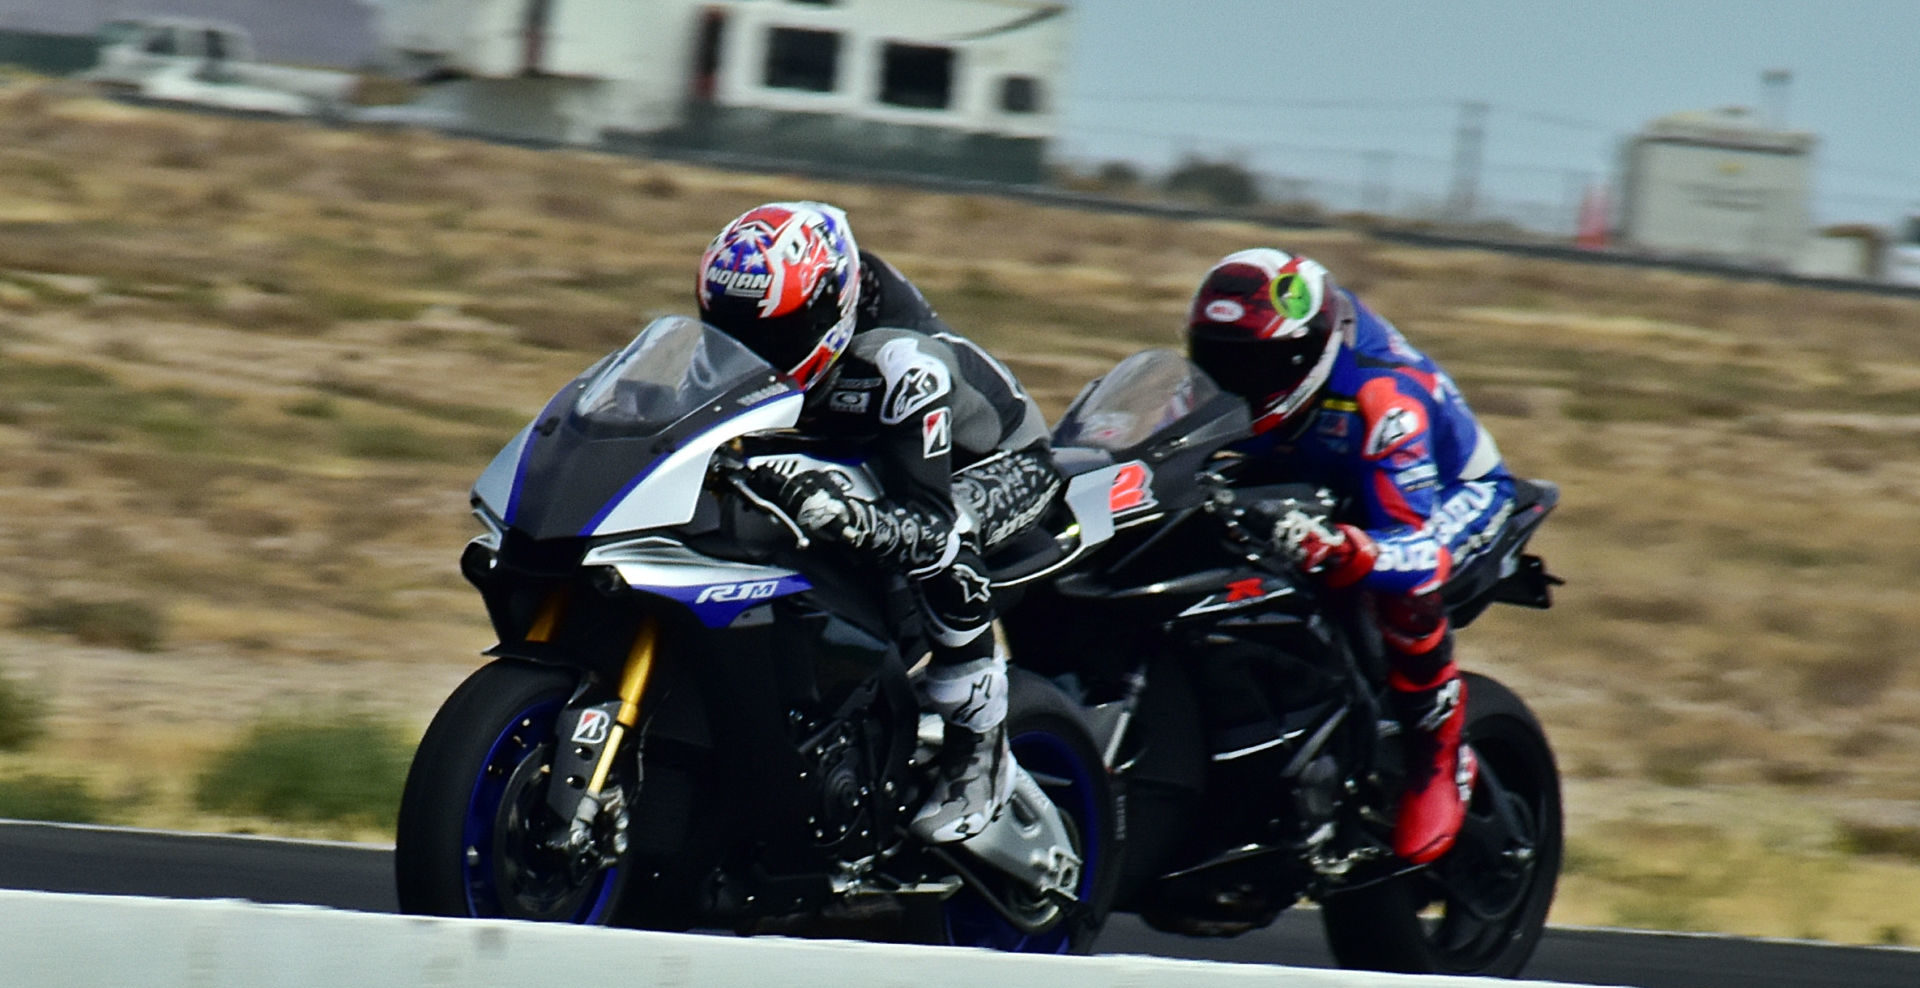 Former MotoGP World Champion Casey Stoner (left) and former AMA Superbike Champion Josh Herrin (right) on the main straight at Willow Springs International Raceway. Photo by Michael Gougis.